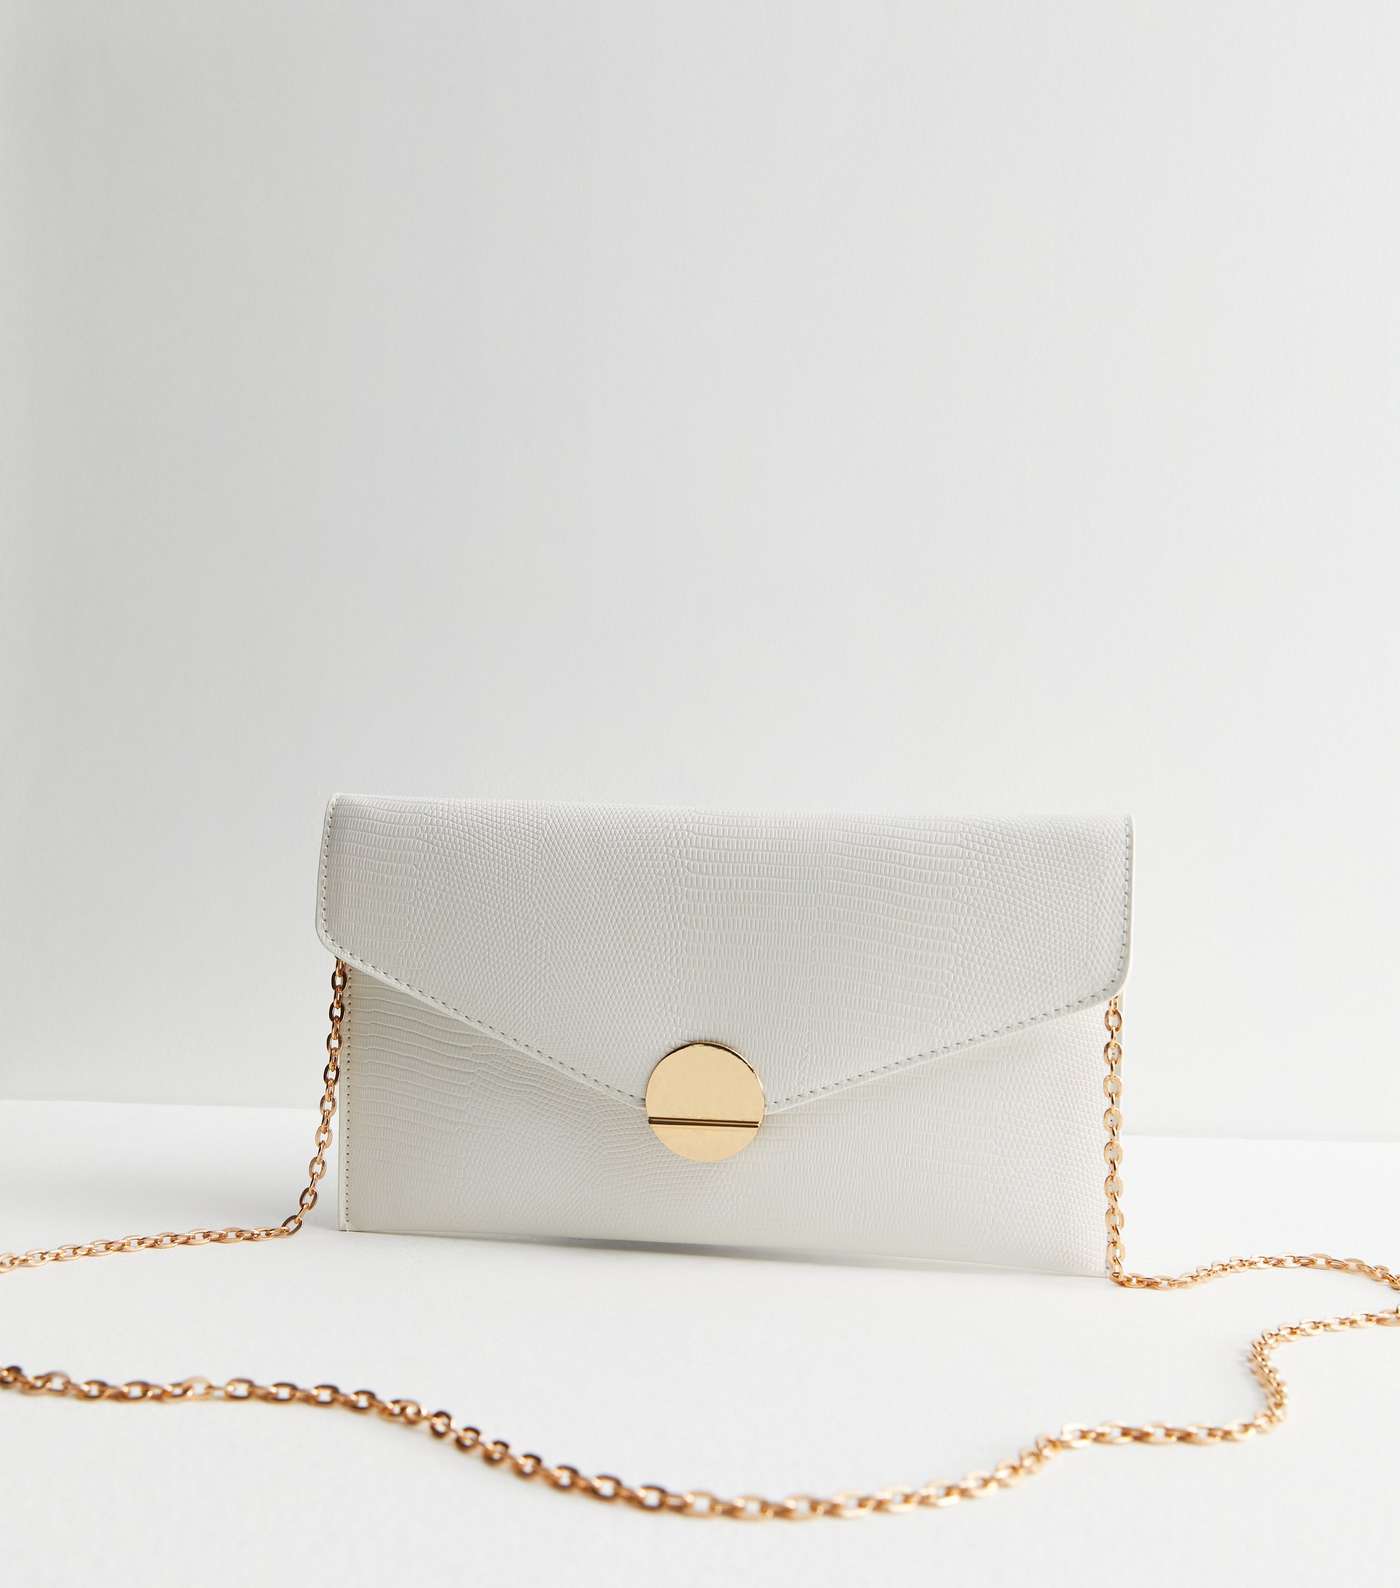 White Leather-Look Envelope Clutch Bag